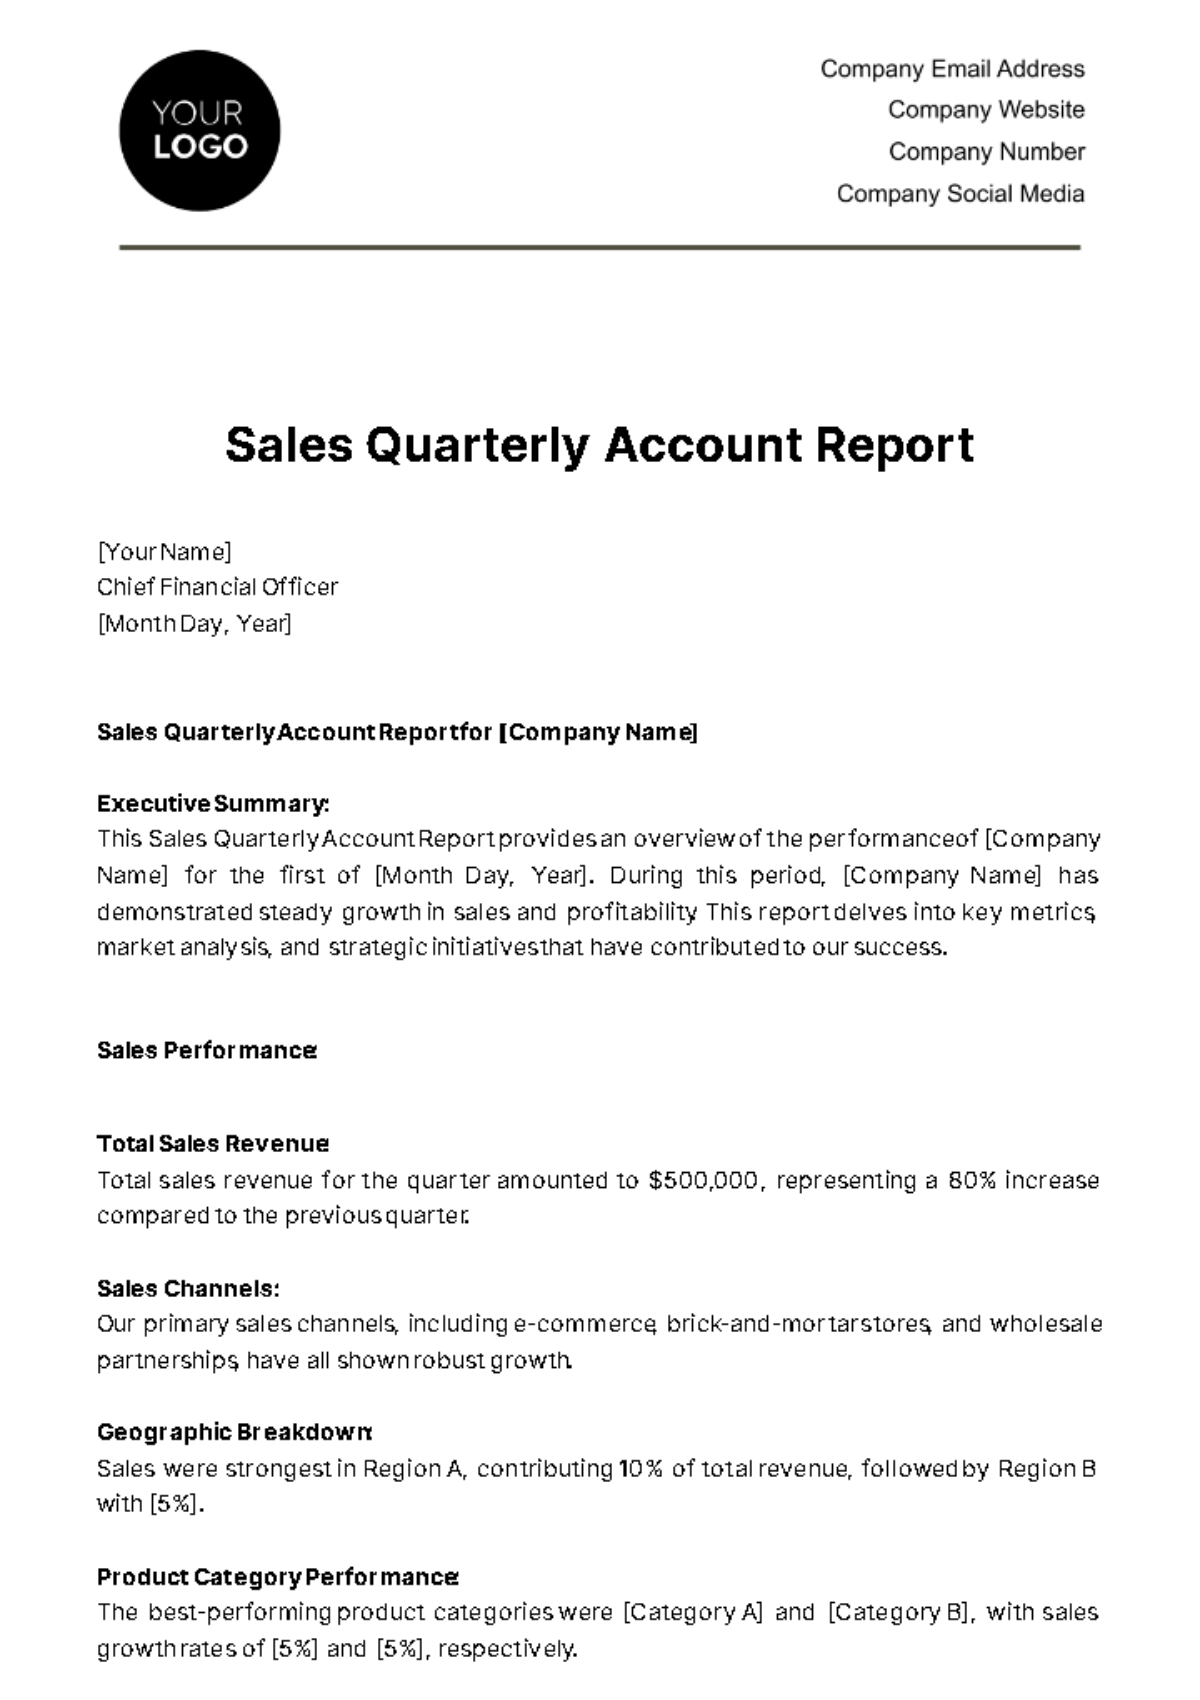 Sales Quarterly Account Report Template